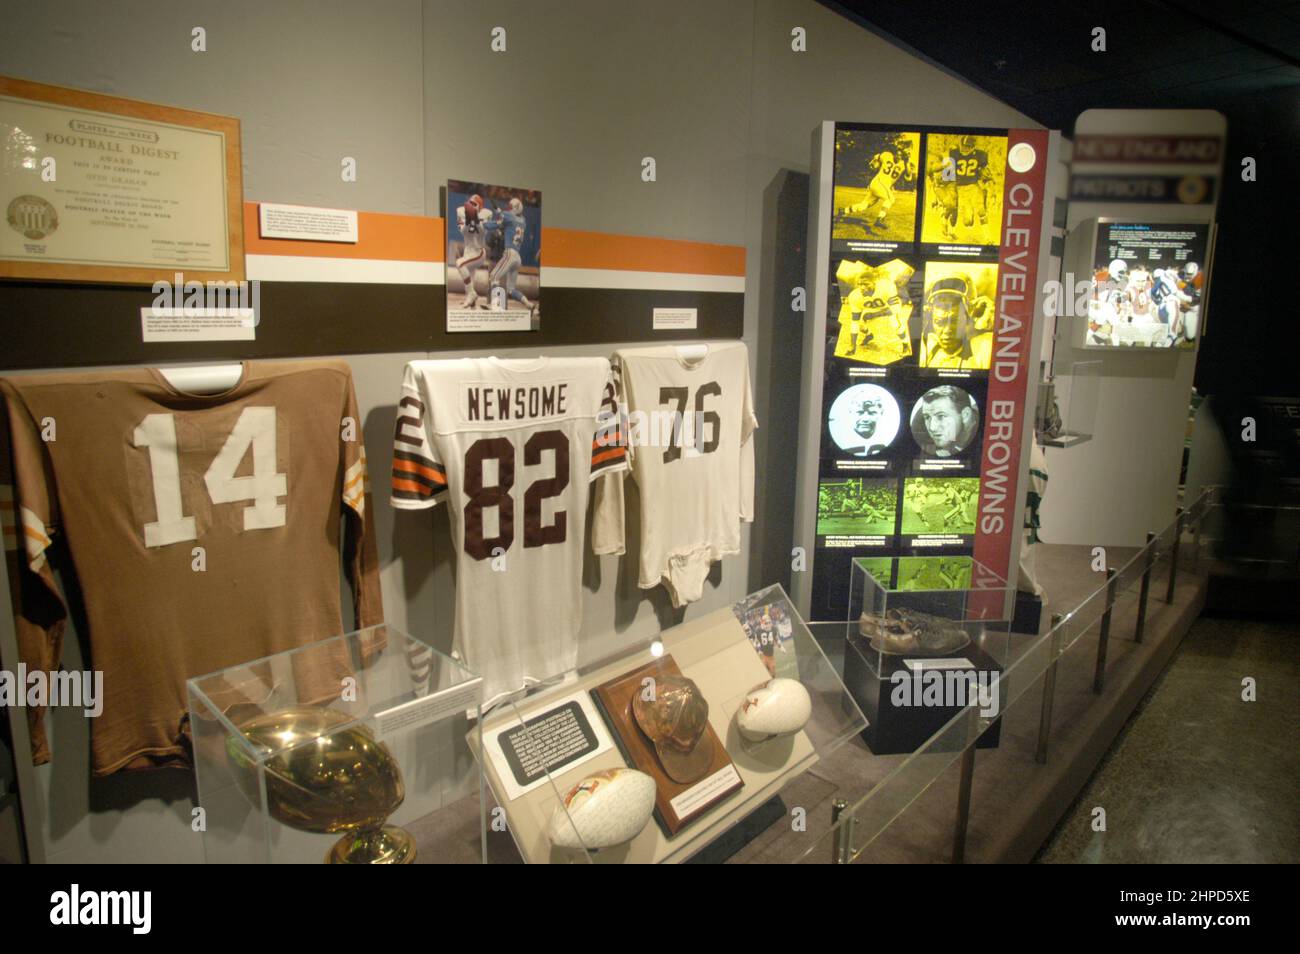 Pro Football Hall of Fame in Canton Ohio USA, Cleavland Browns, Jim Brown, Newsome Stock Photo